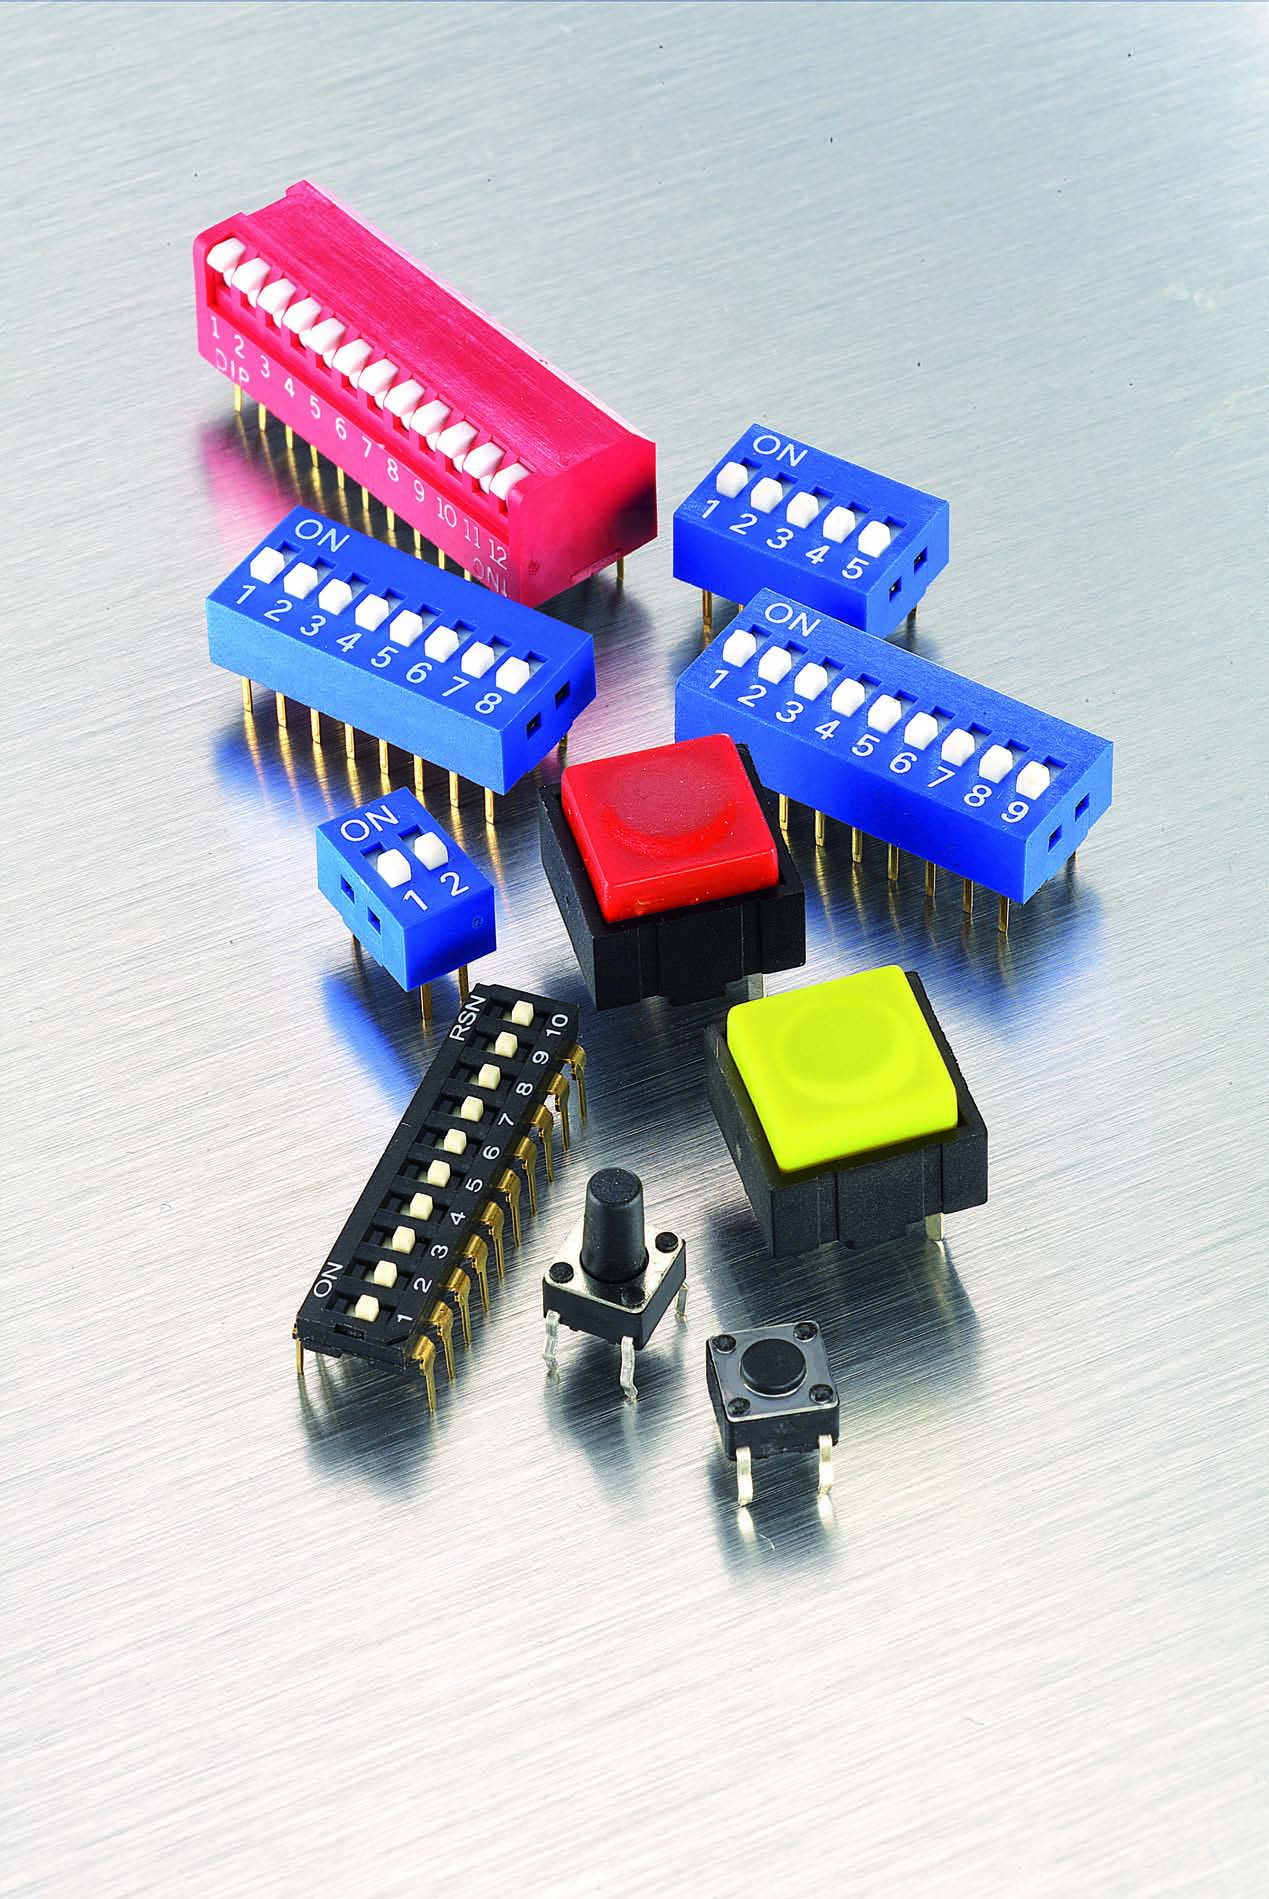 Electronic PUSNTI E ES Tact and DIP switches